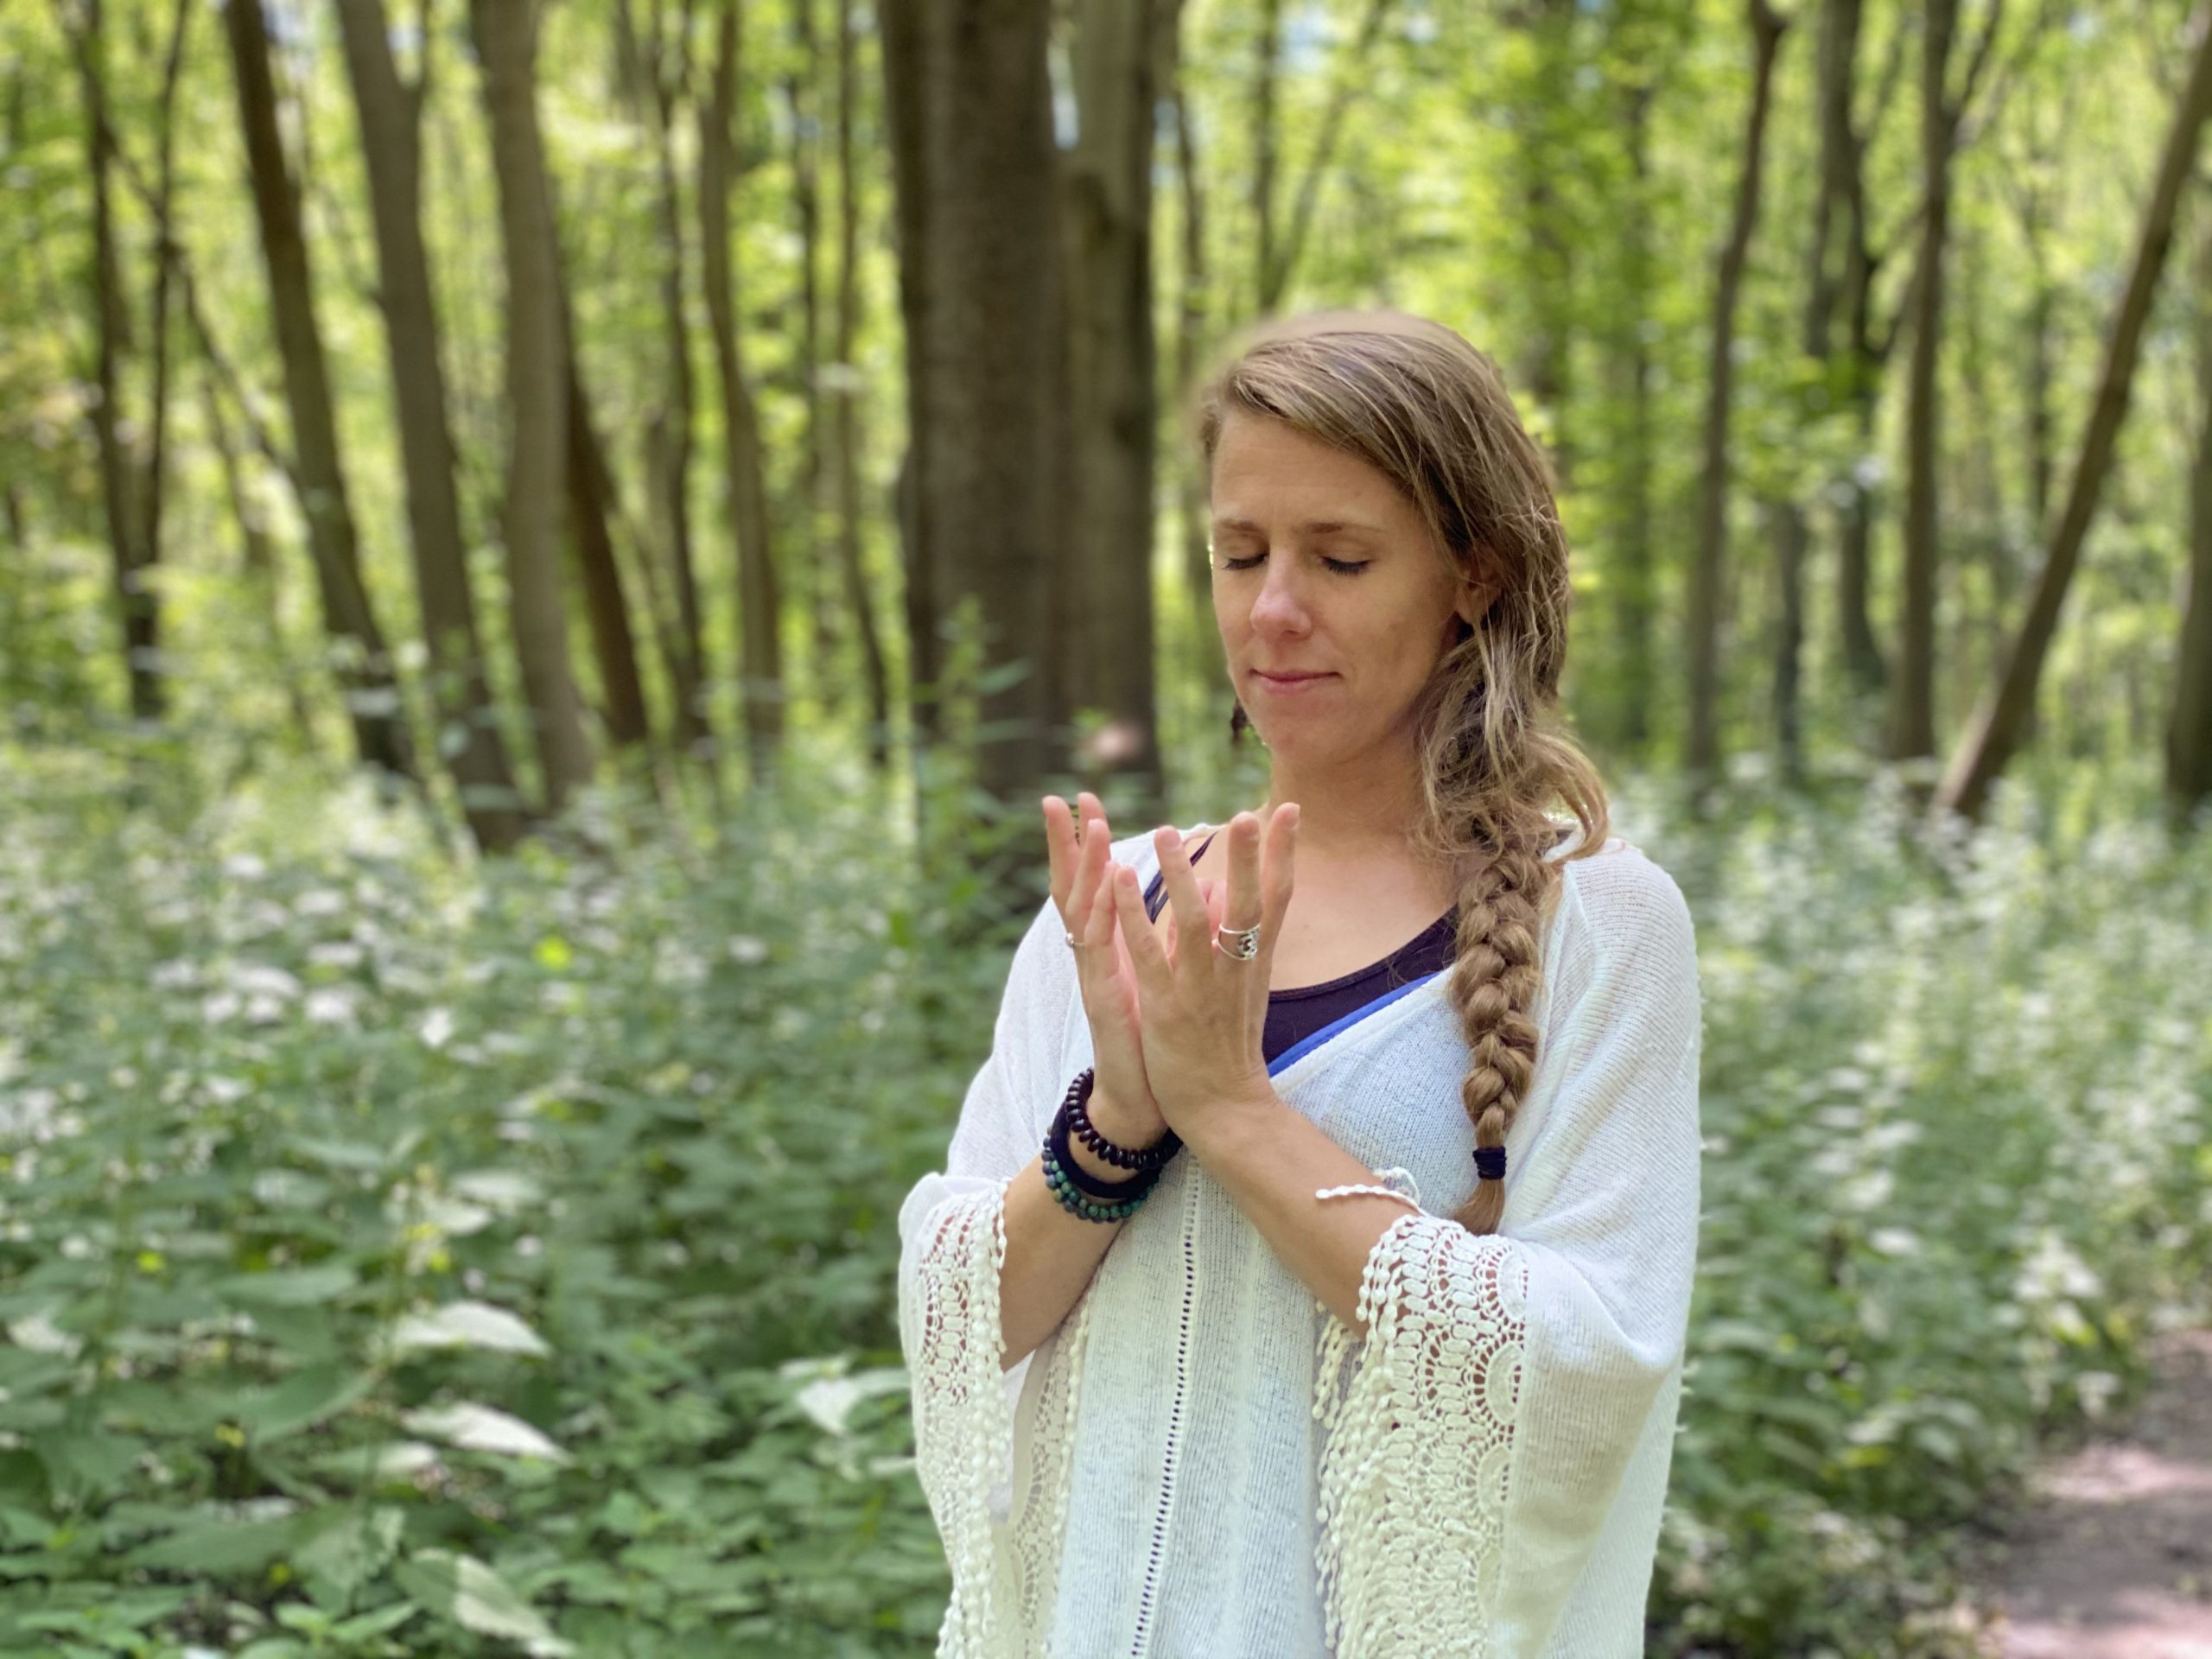 A slim girl standing in the forest with the Therapeutic & transformative yoga pose